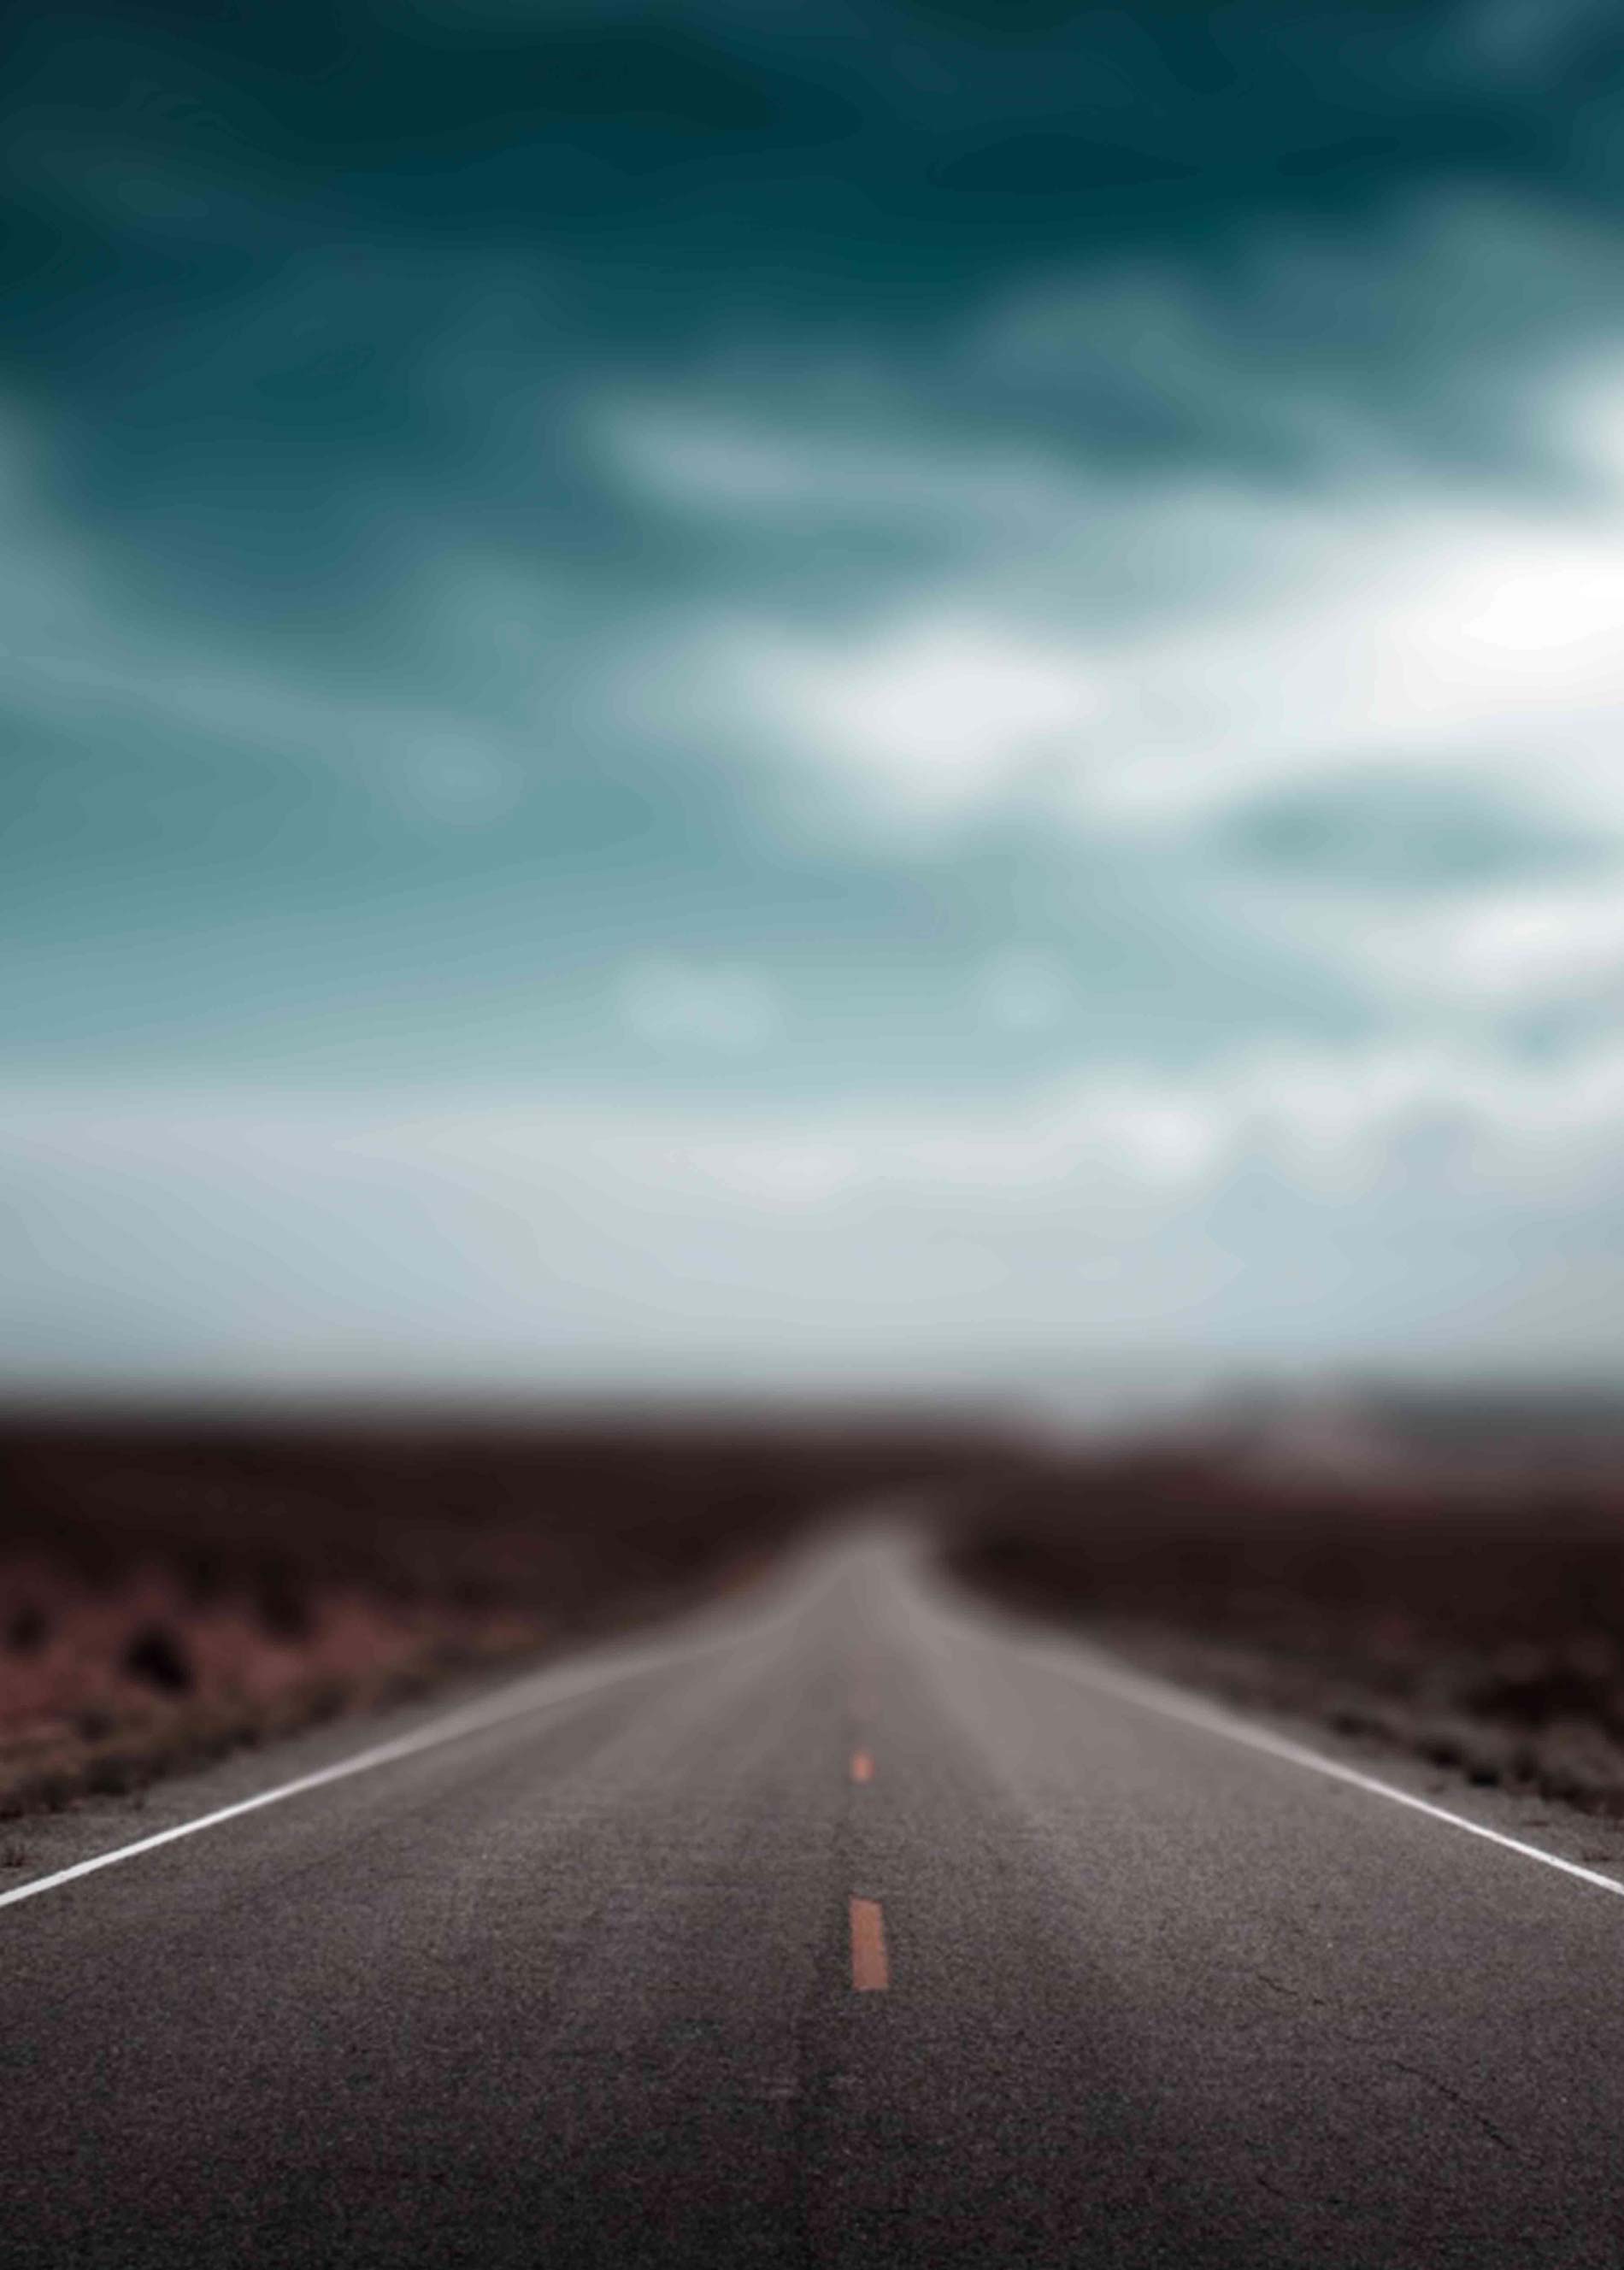 Blur Background With Road and Sky Full HD